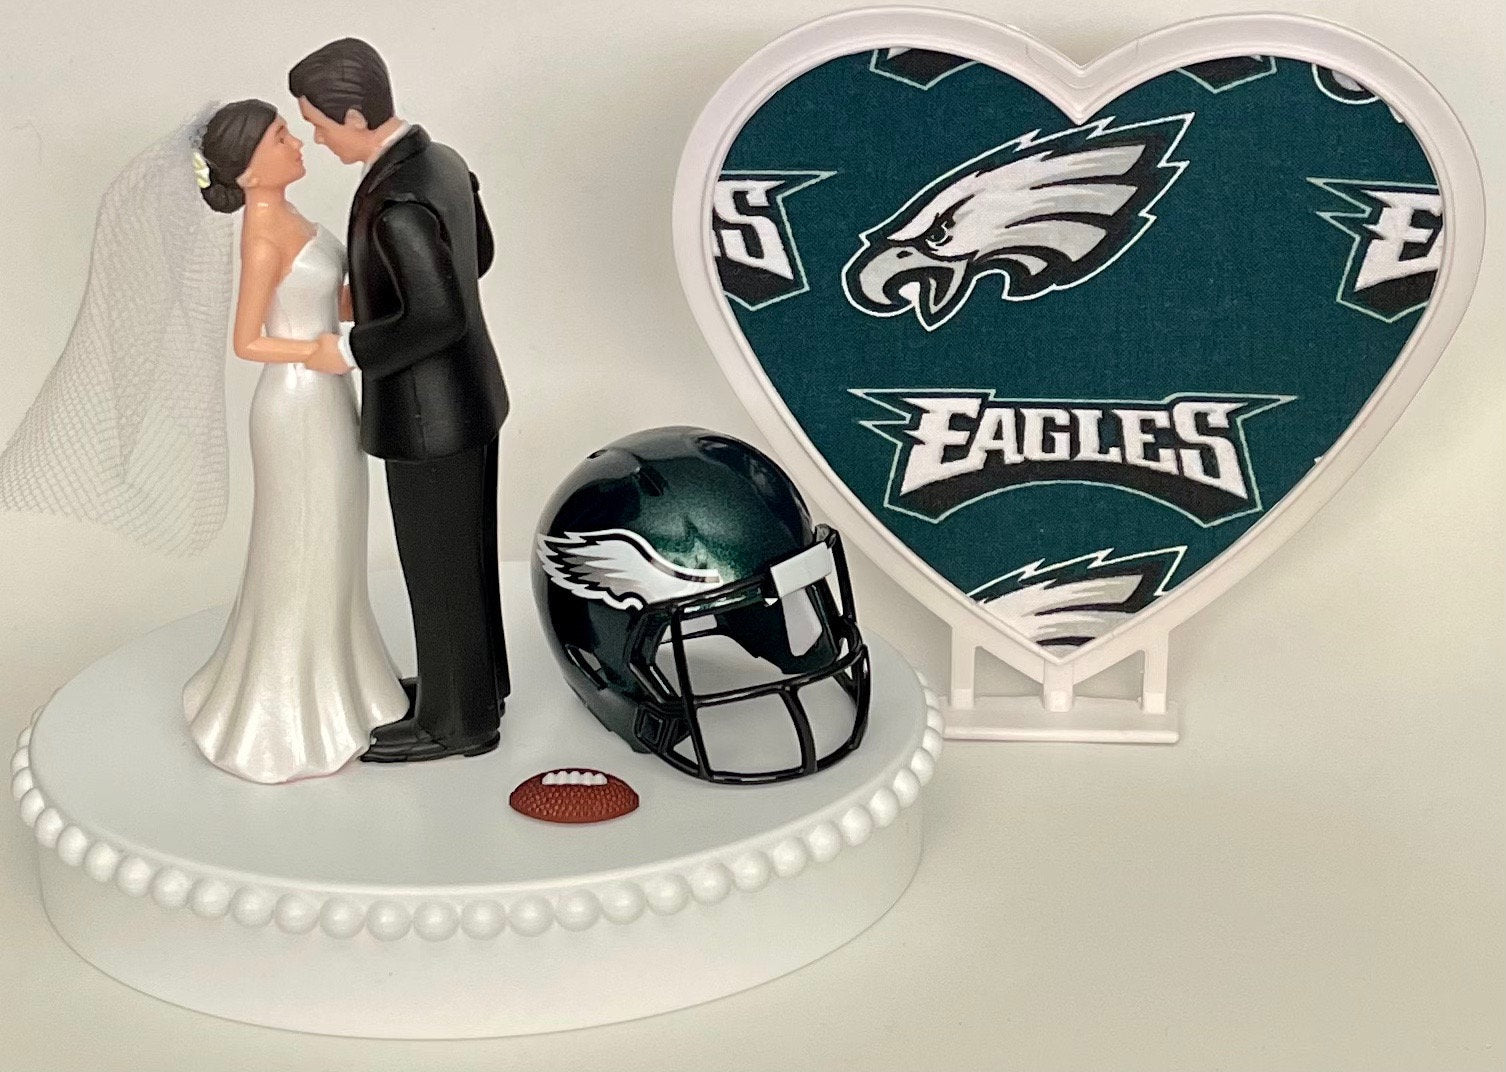 Wedding Cake Topper Philadelphia Eagles Football Themed Beautiful Short-Haired Bride and Groom One-of-a-Kind Sports Fan Cake Top Shower Gift